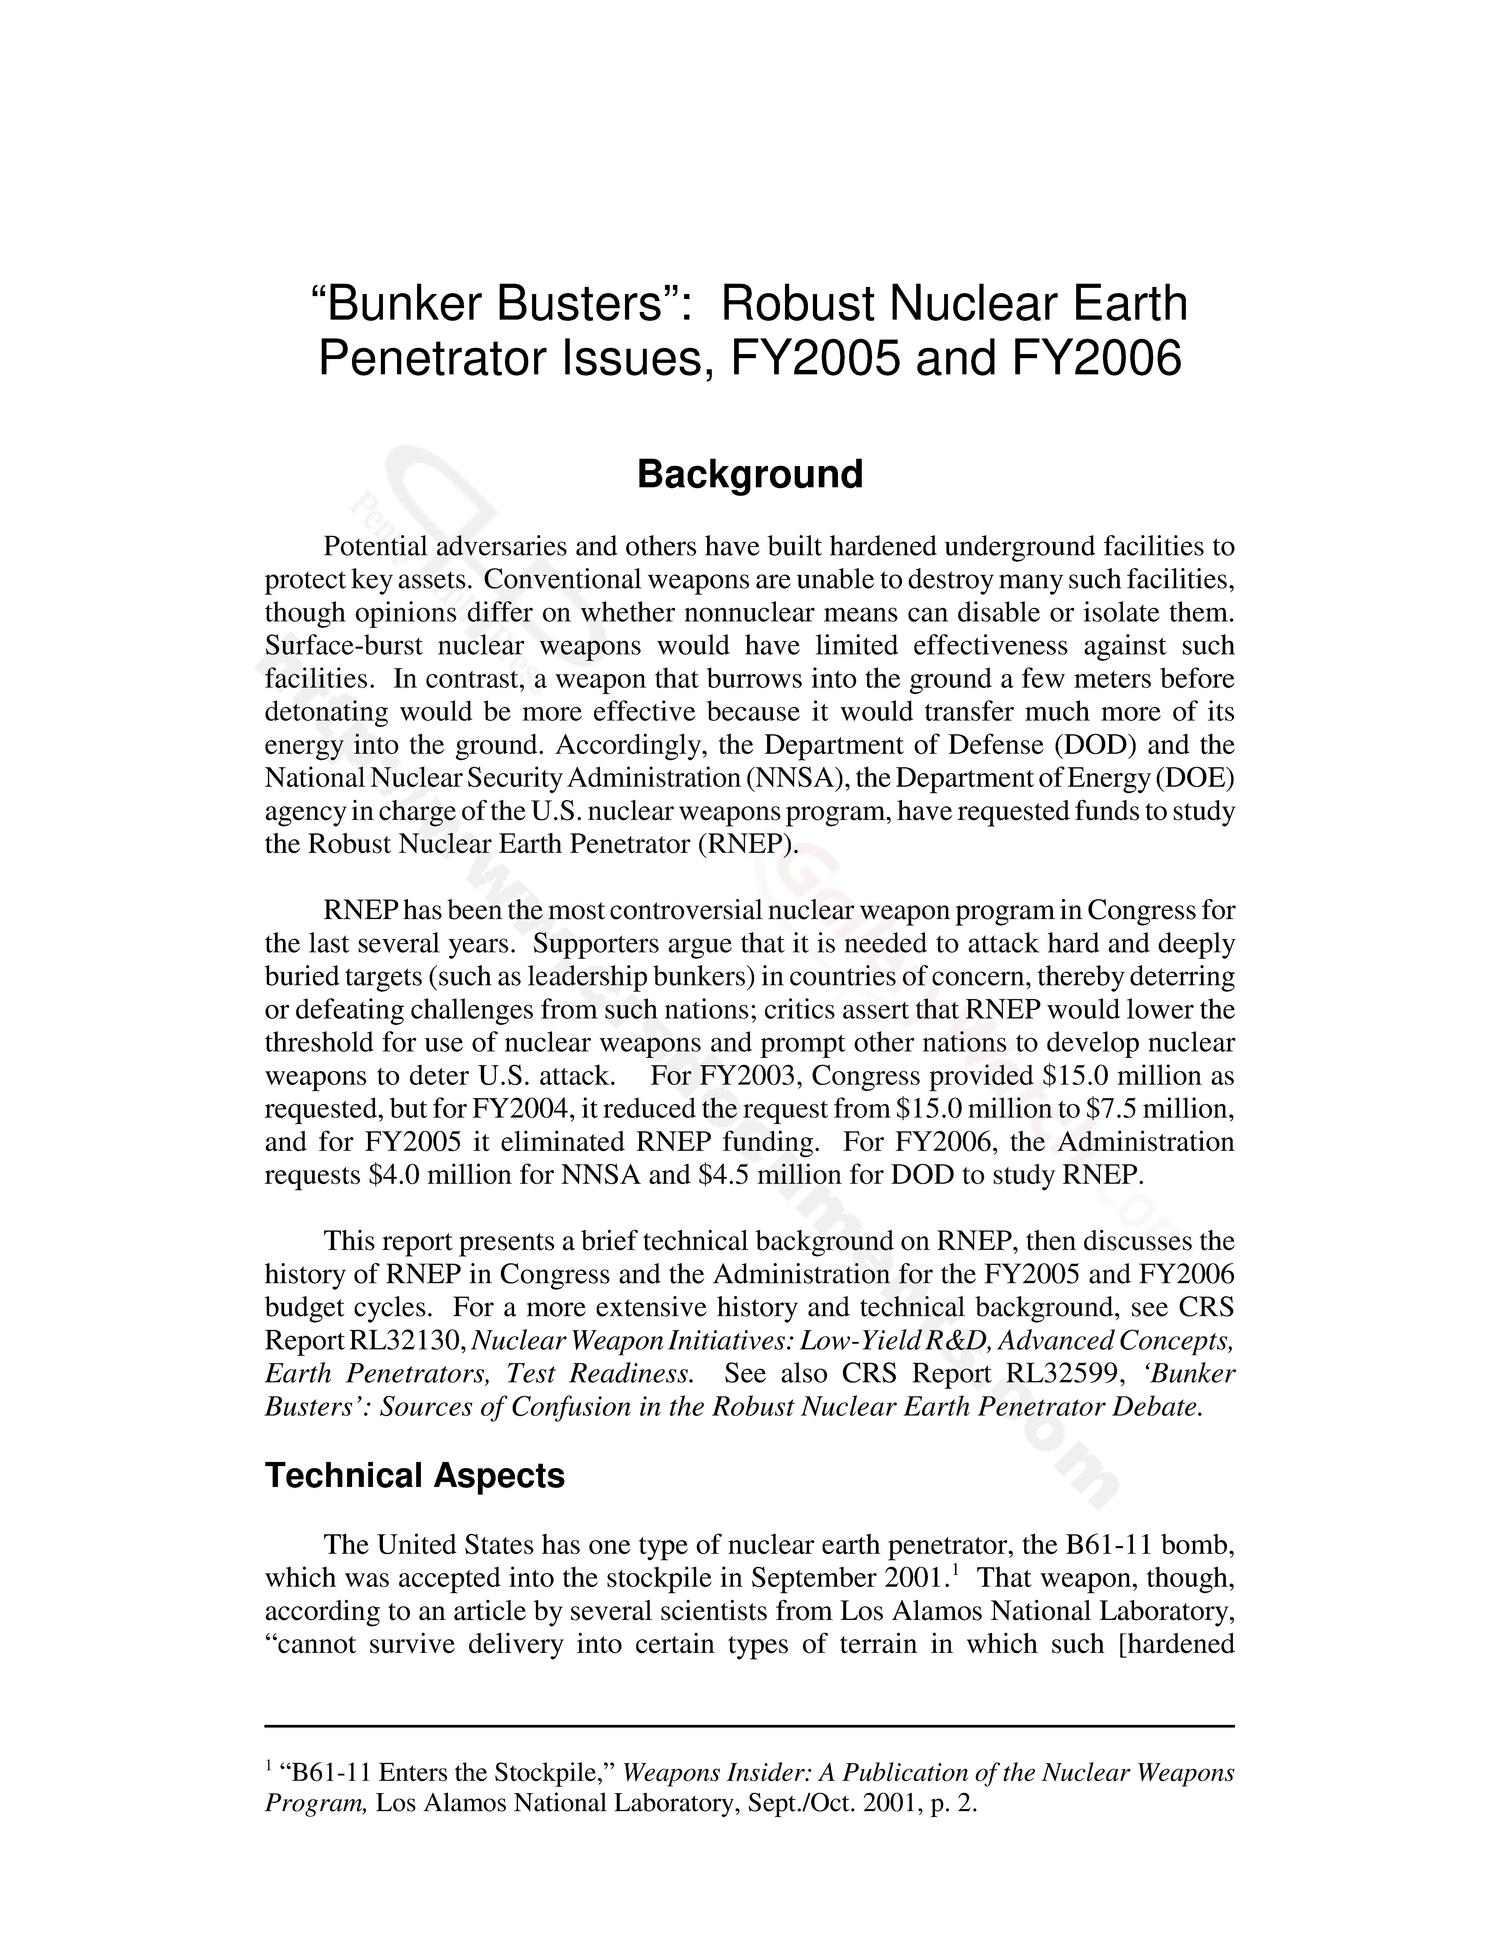 "Bunker Busters": Robust Nuclear Earth Penetrator Issues, FY2005 and FY2006
                                                
                                                    [Sequence #]: 4 of 23
                                                